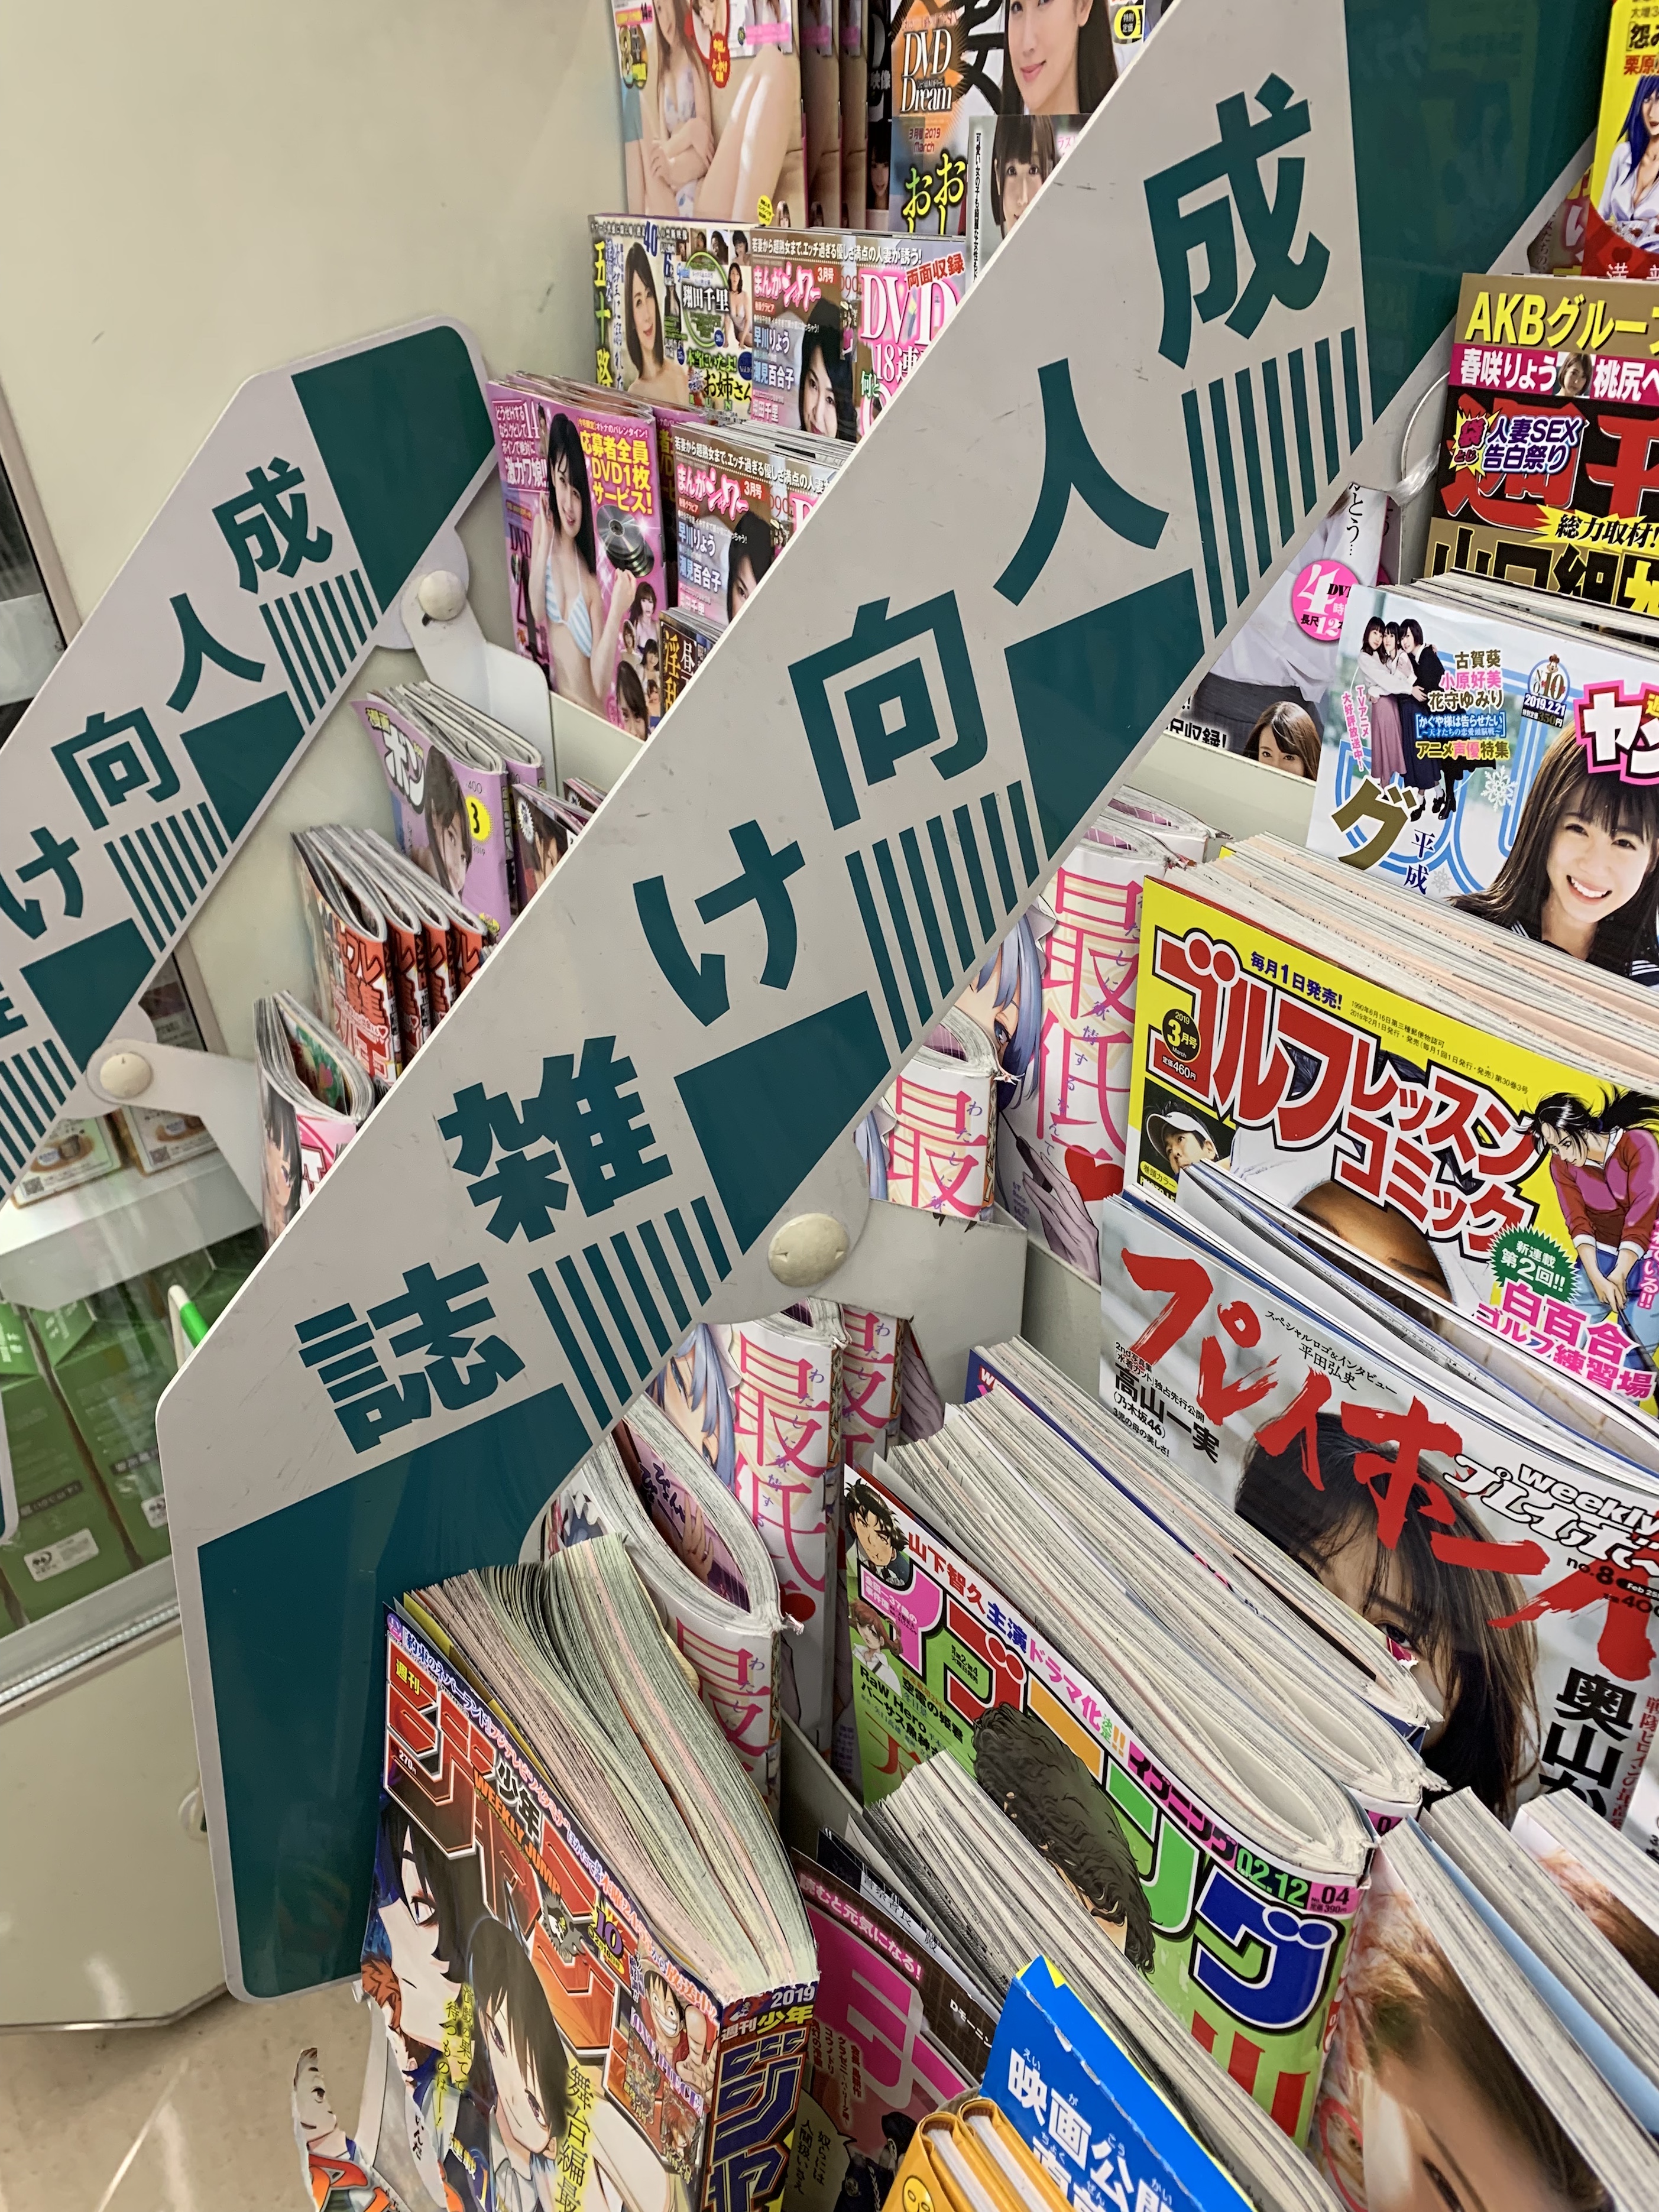 Japan Porn Magazines - Too Little, Too Late? Porn Mags Set to Disappear From Convenience  Storesâ€“And So Will Male Courage? â€“ Japan Subculture Research Center